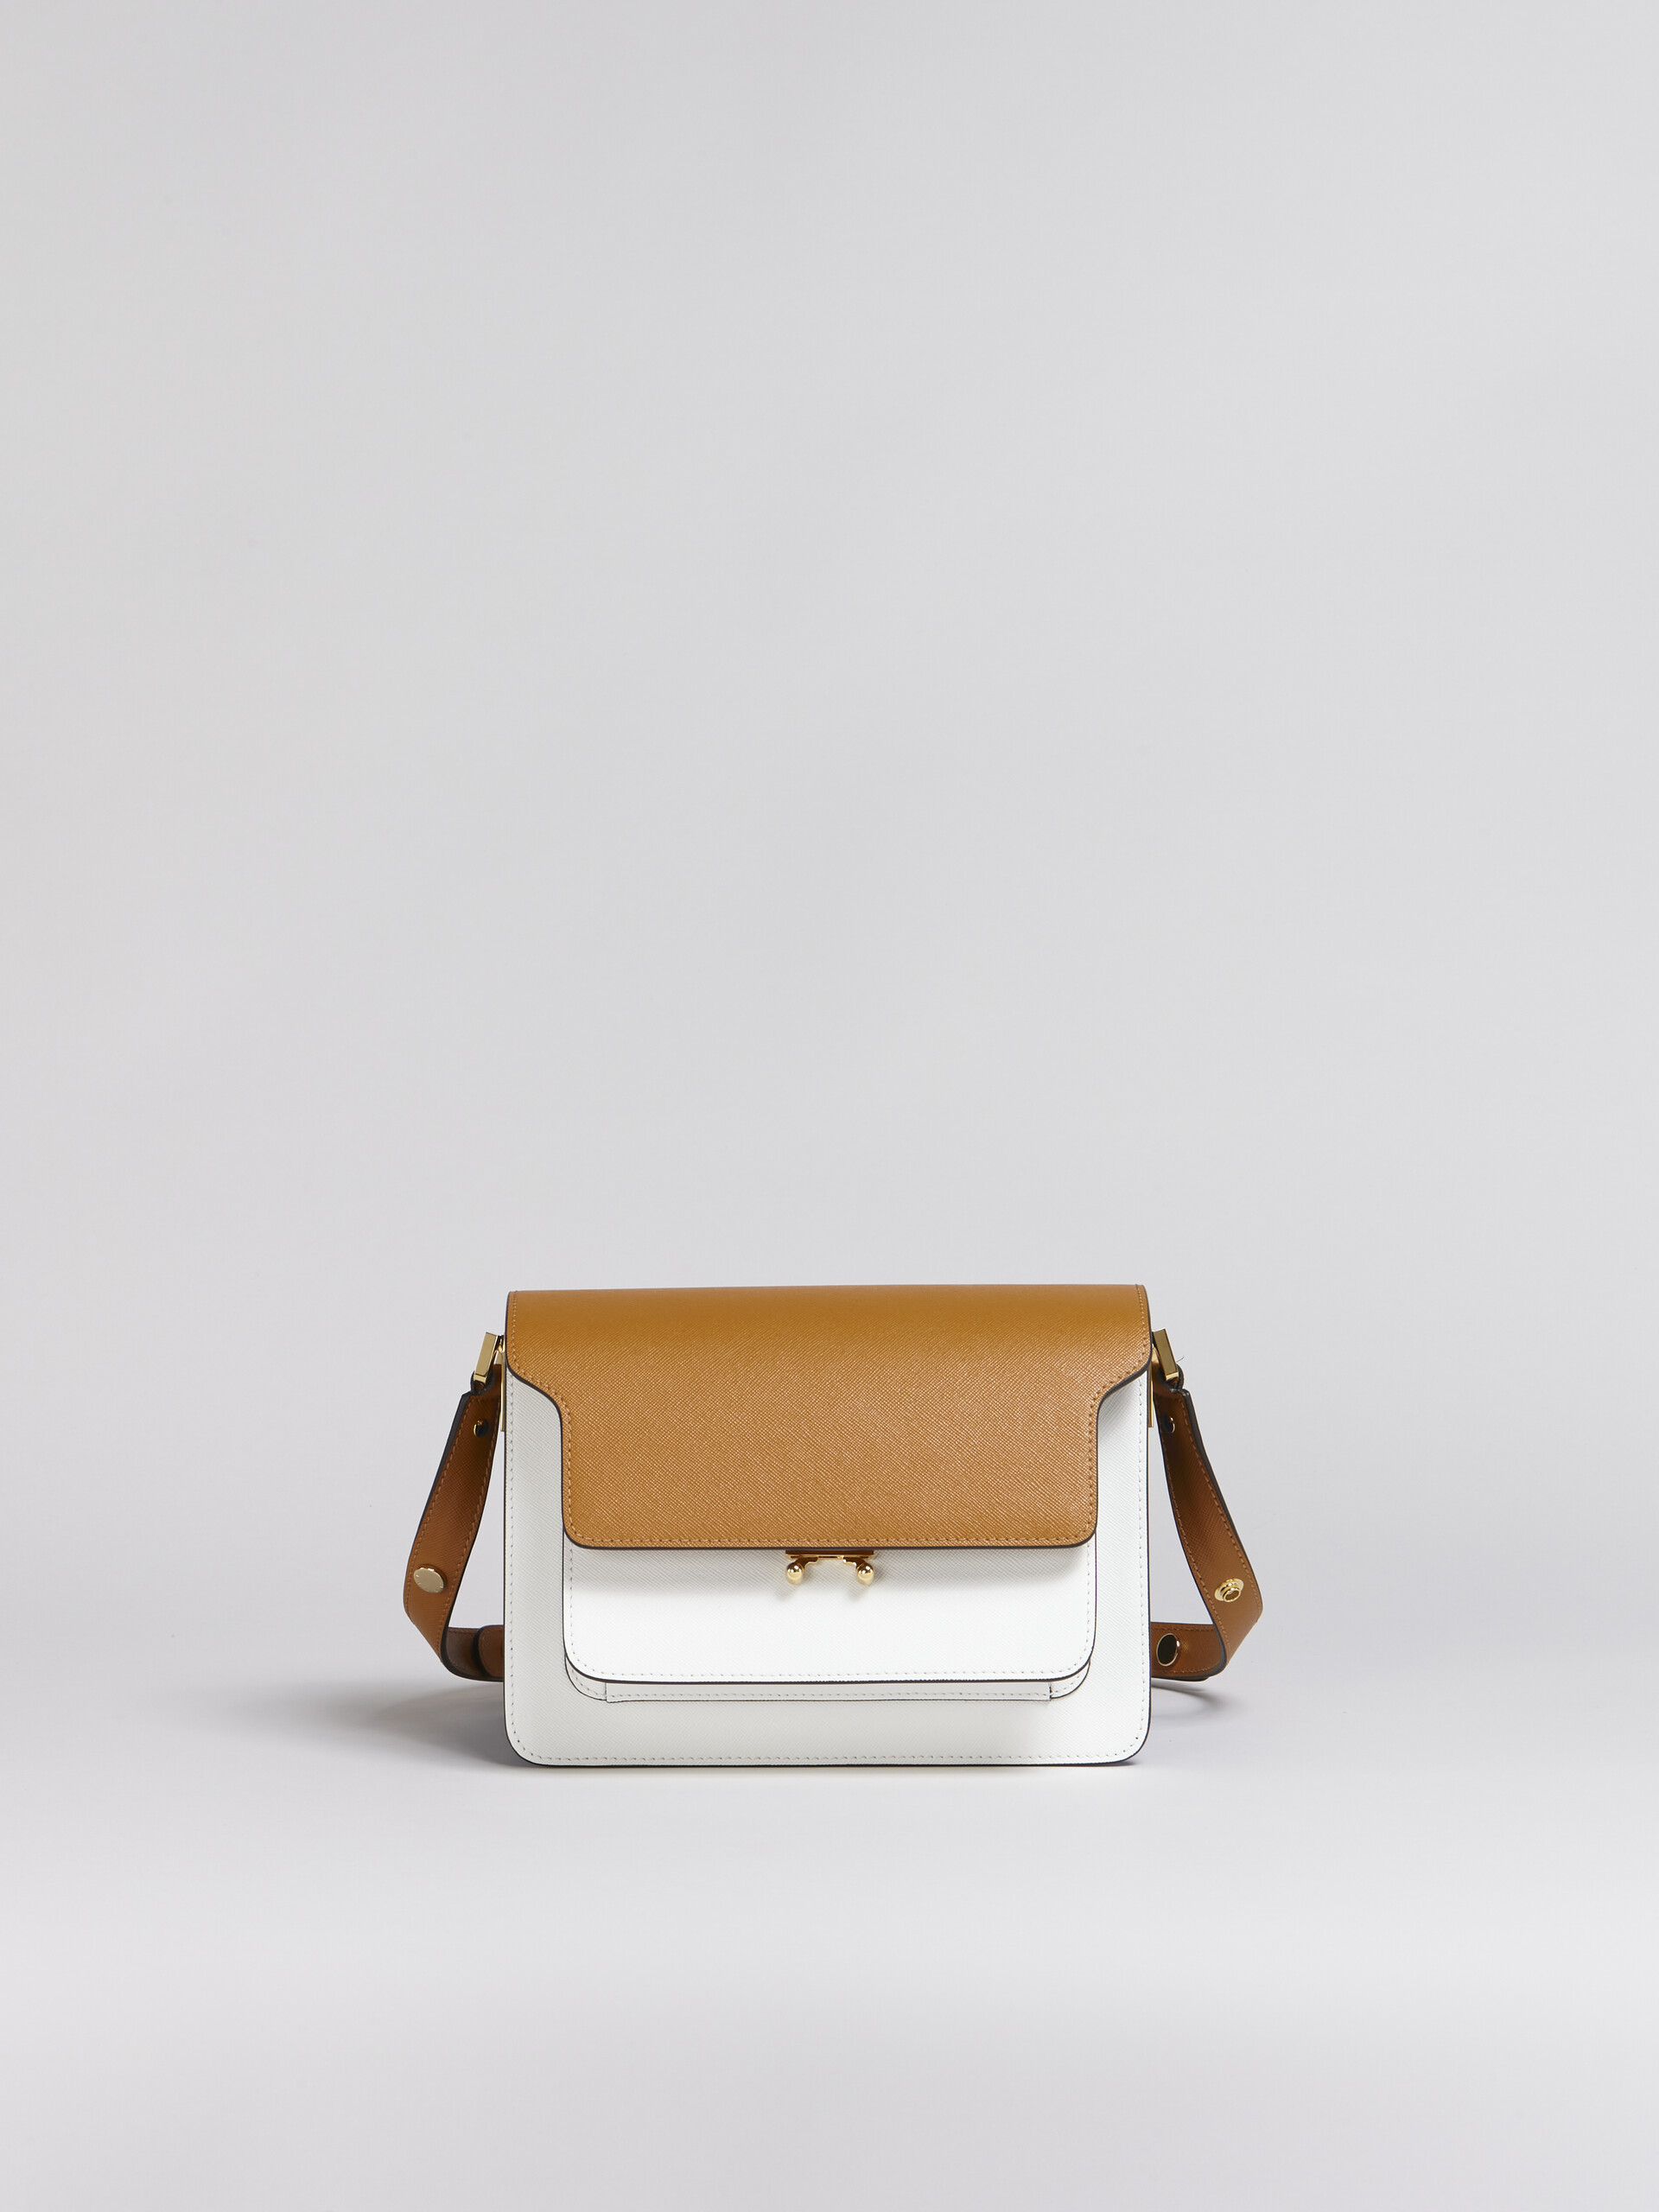 TRUNK medium bag in brown white and blue saffiano leather - Shoulder Bags - Image 1